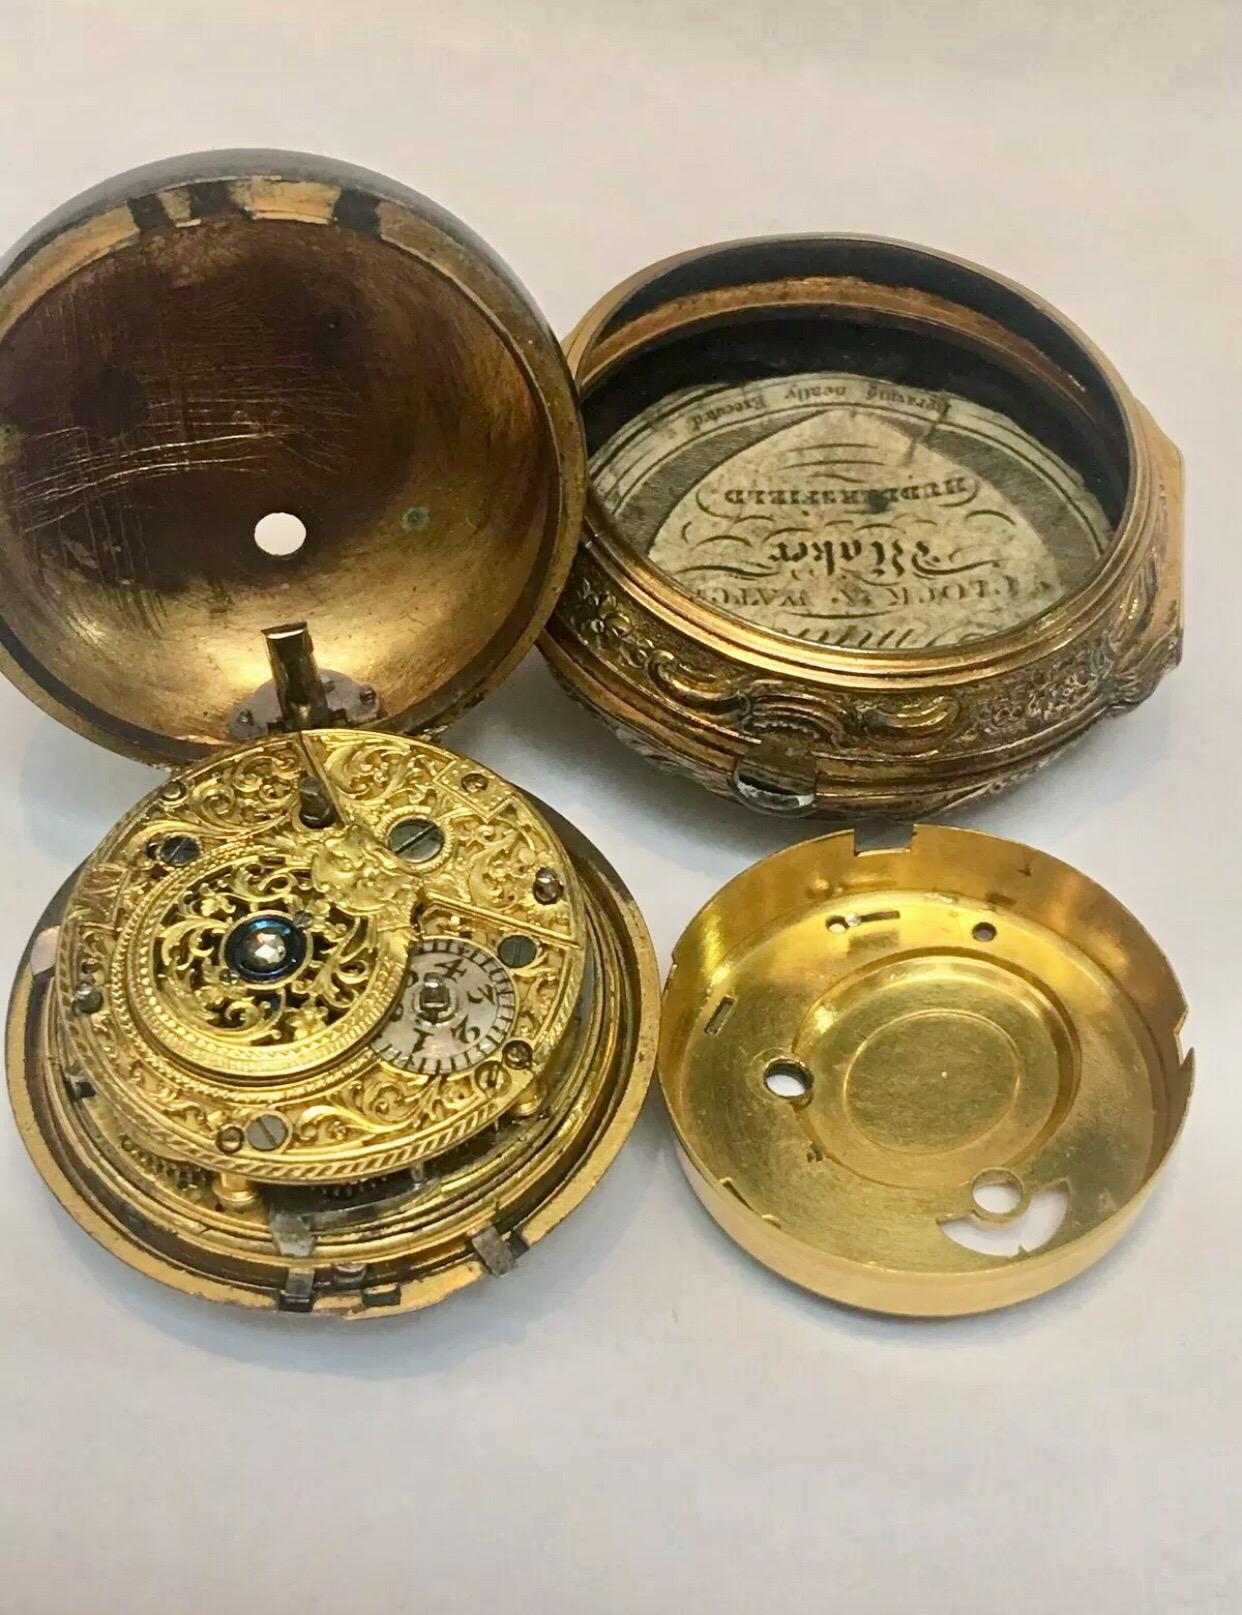 Rare “Dumb” Quarter Repeating Repousse Verge Fusee Pocket Watch by Hubert London For Sale 3